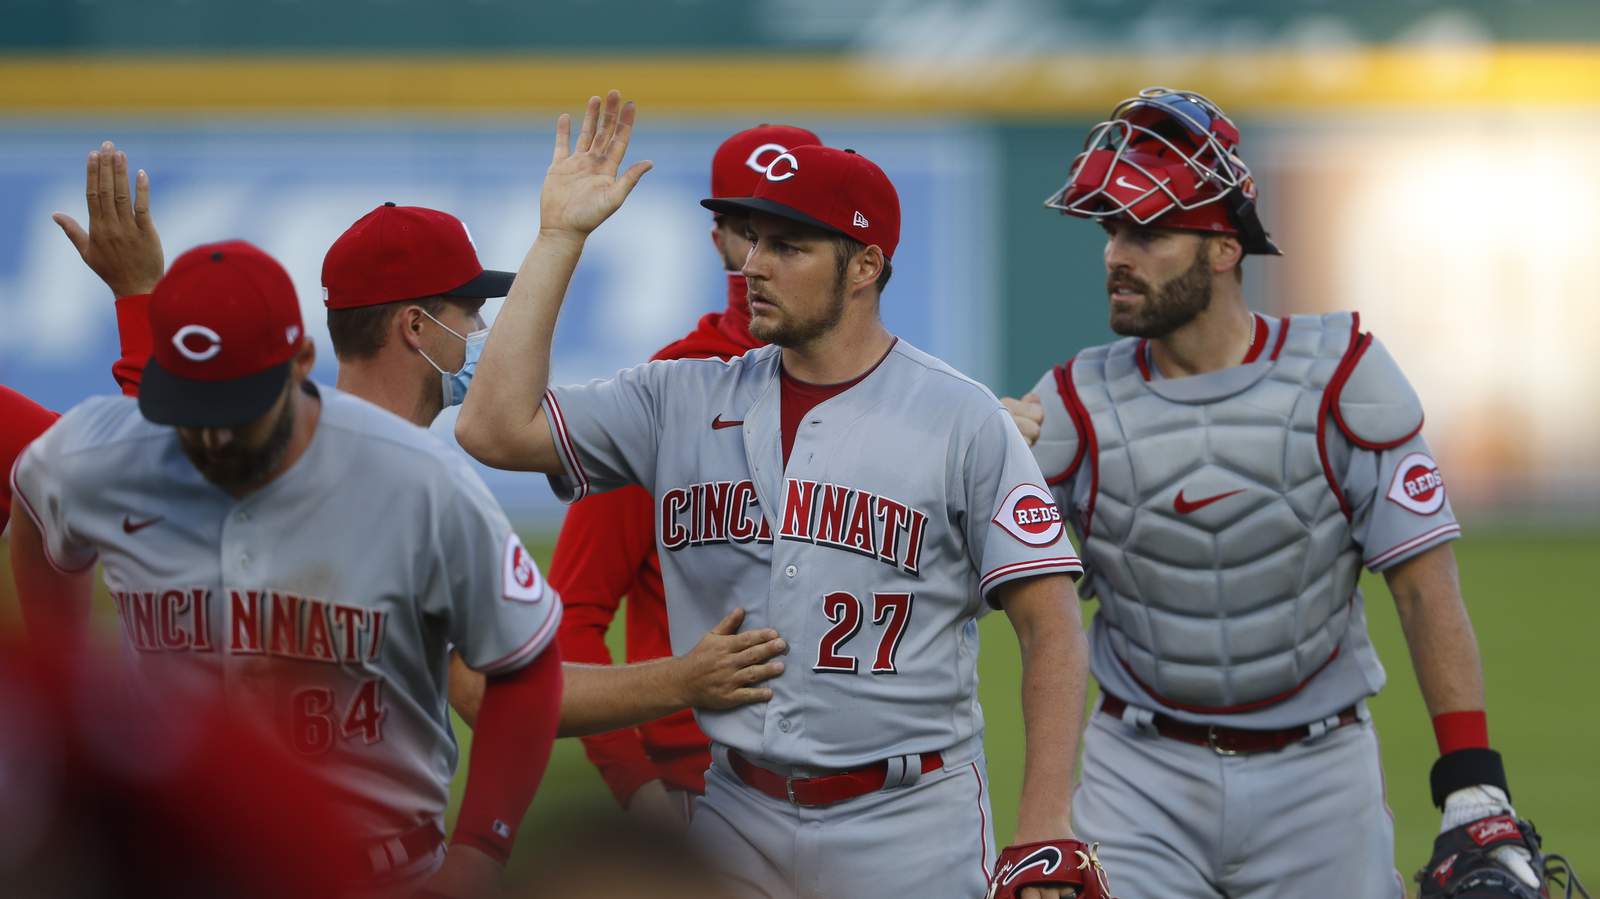 7-inning doubleheaders debut in MLB, Reds sweep Tigers